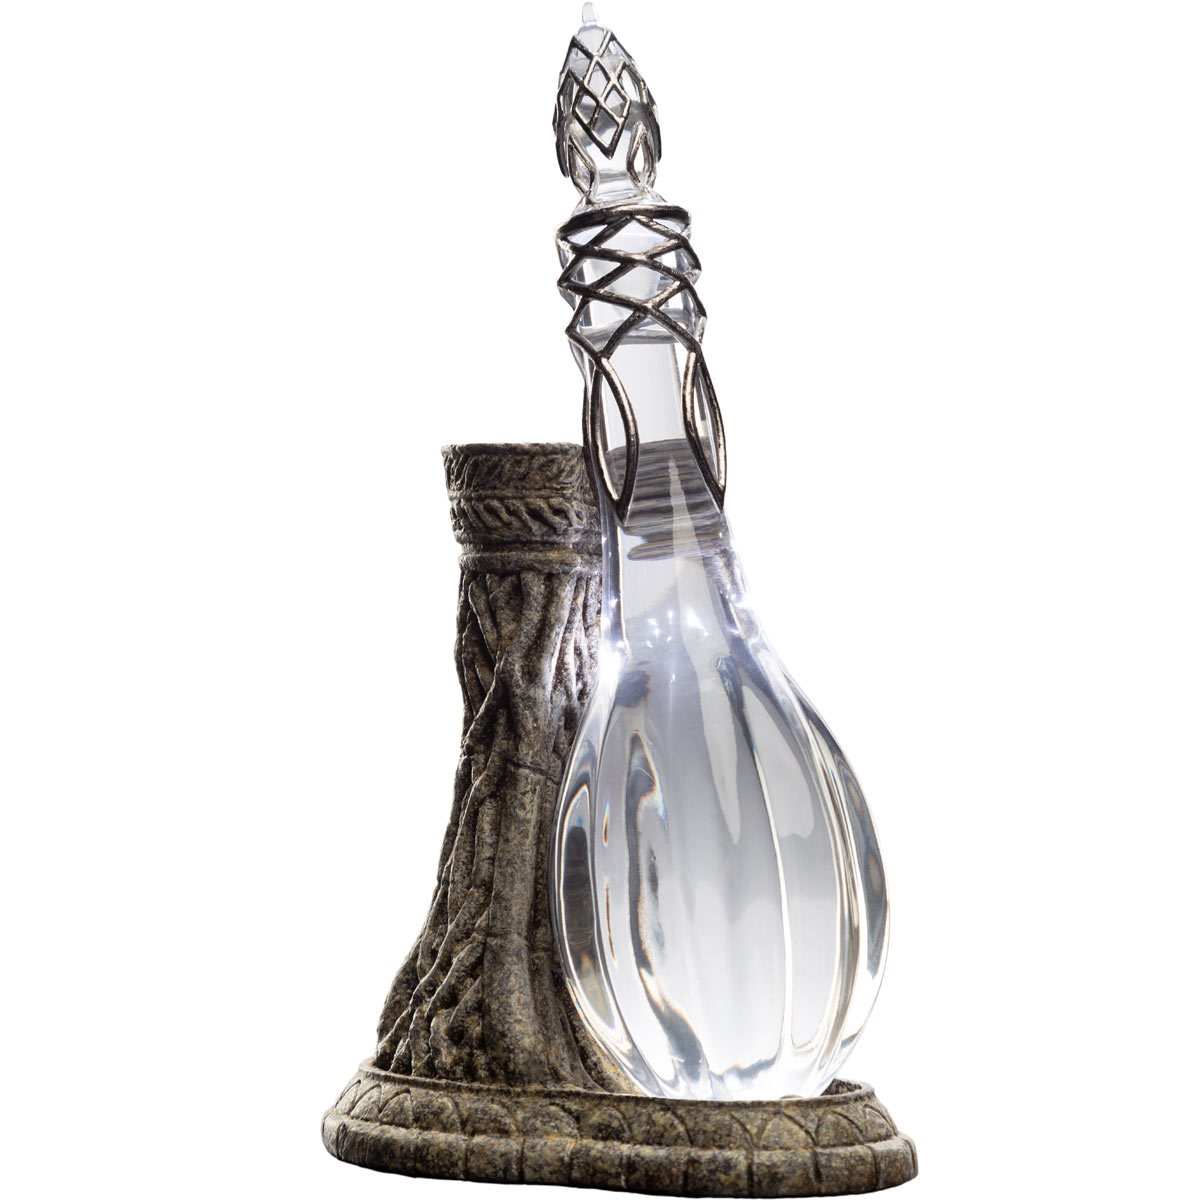 The Lord the Rings Galadriel's Phial 1:1 Prop